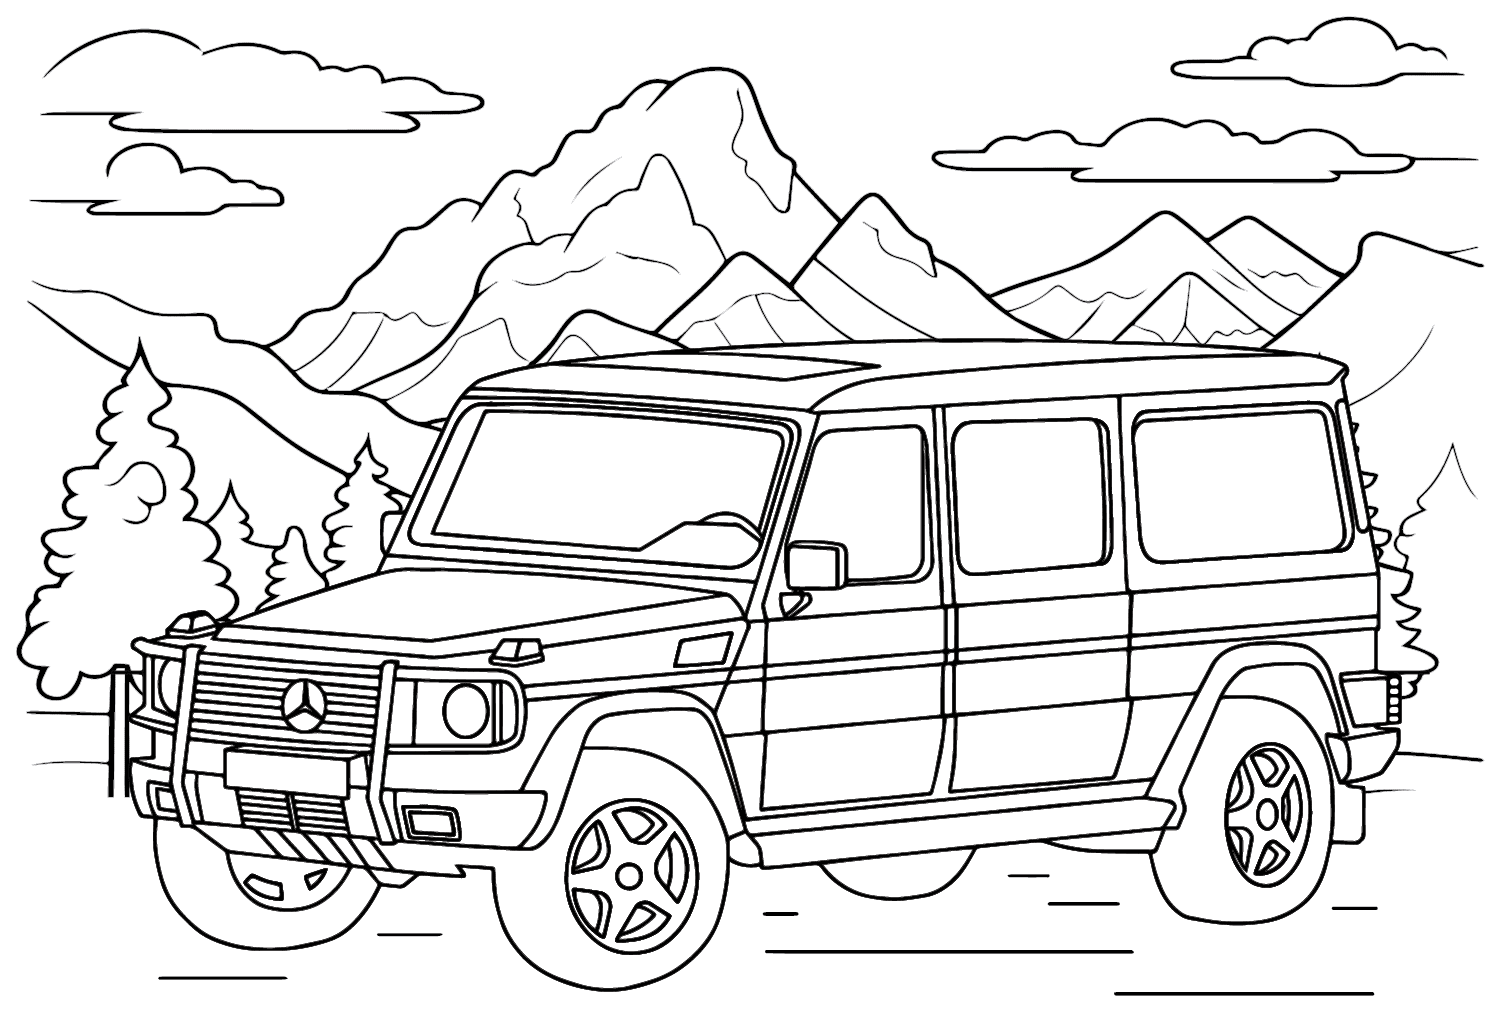 Mercedes-Benz G-Class SUV Coloring Page from Mercedes-Benz